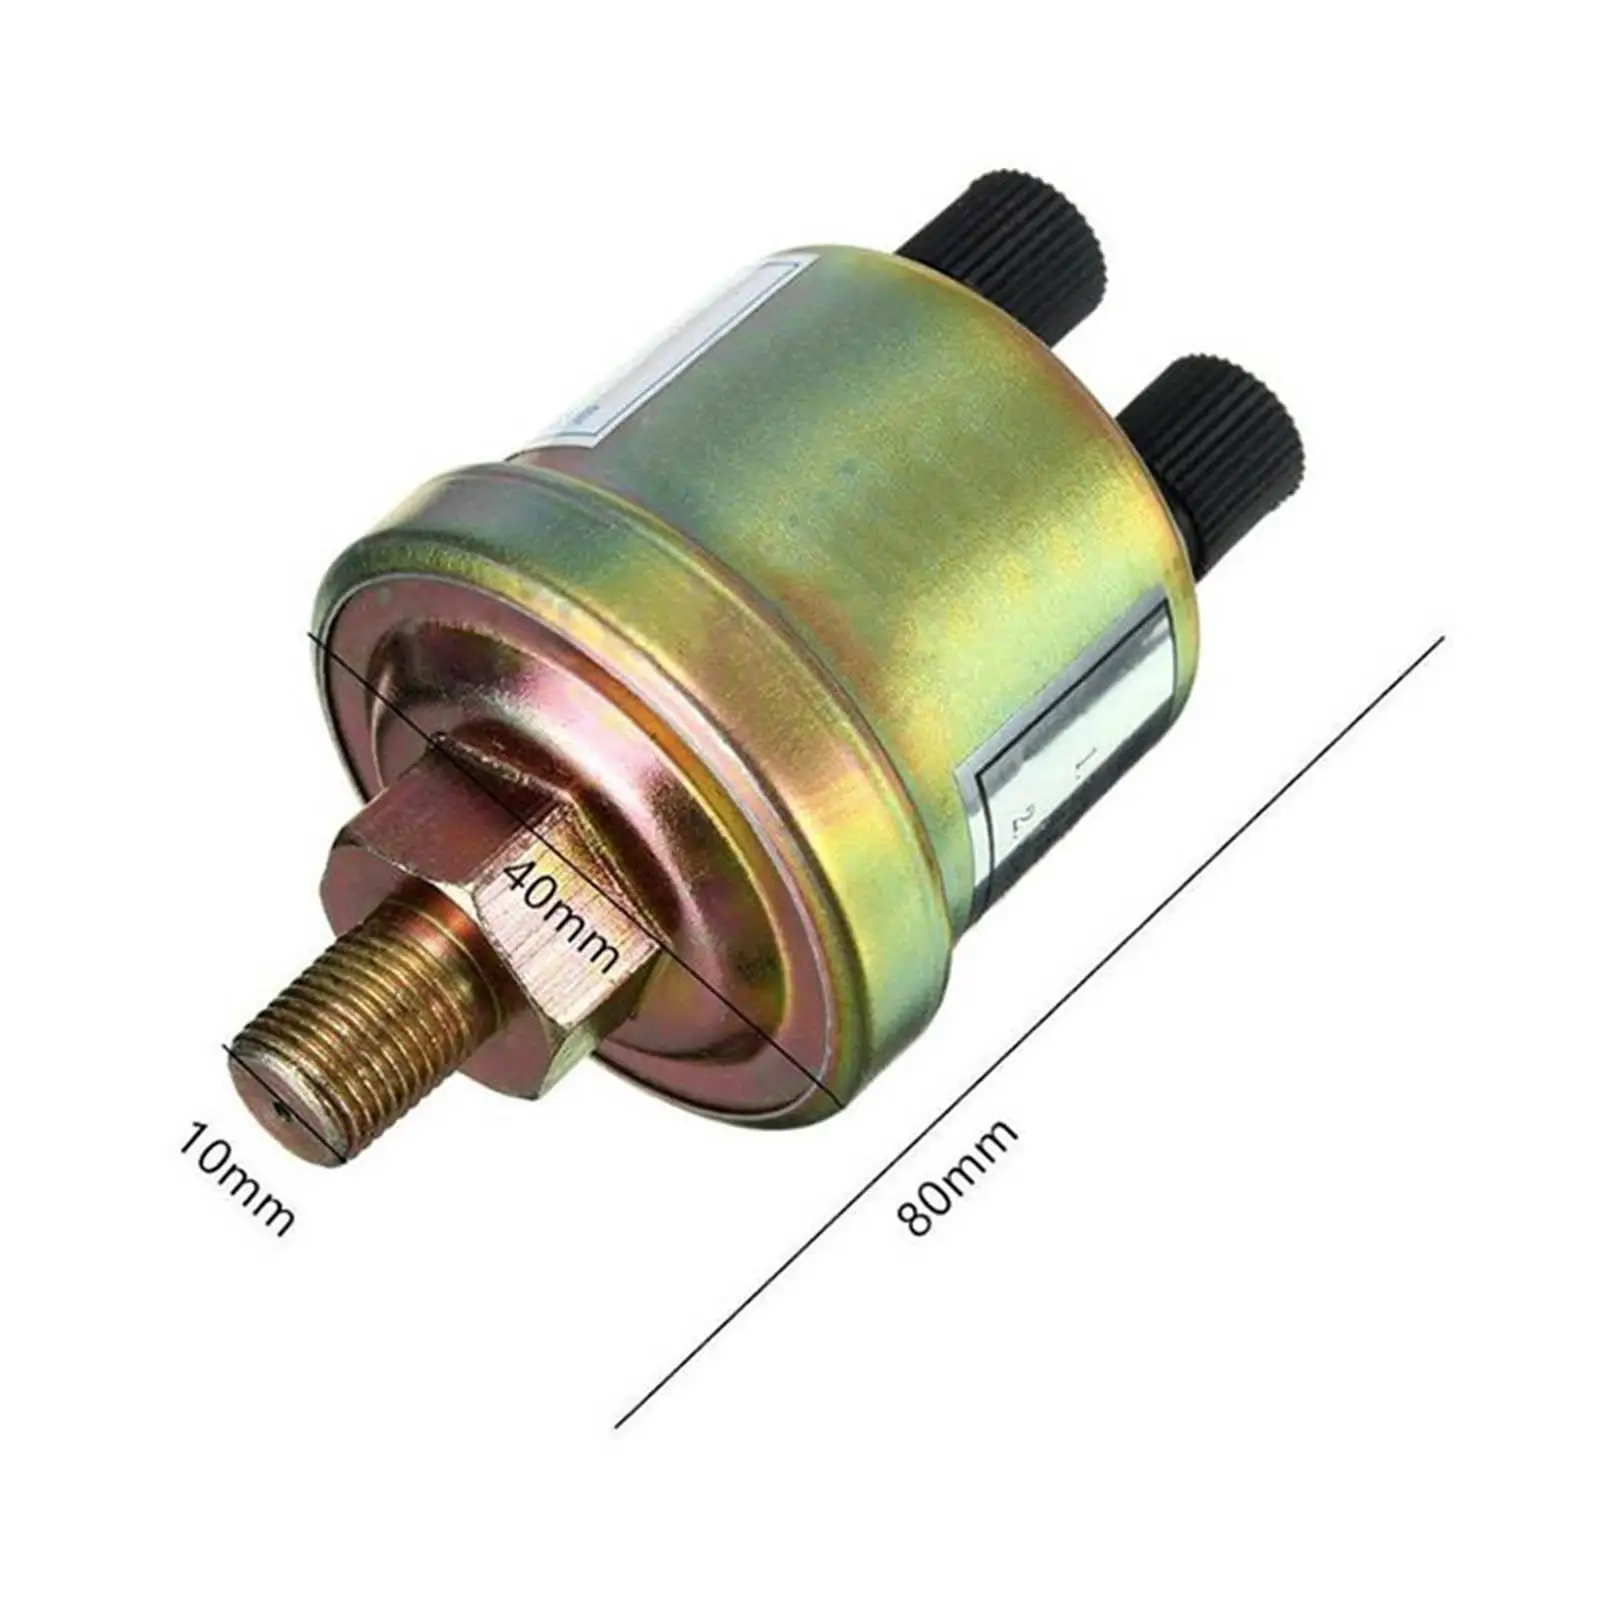 1/8NPT Screw Thread Engine Oil Pressure Sensor, Replaces Durable Easy to Install Professional Wide Applicability Premium Quality